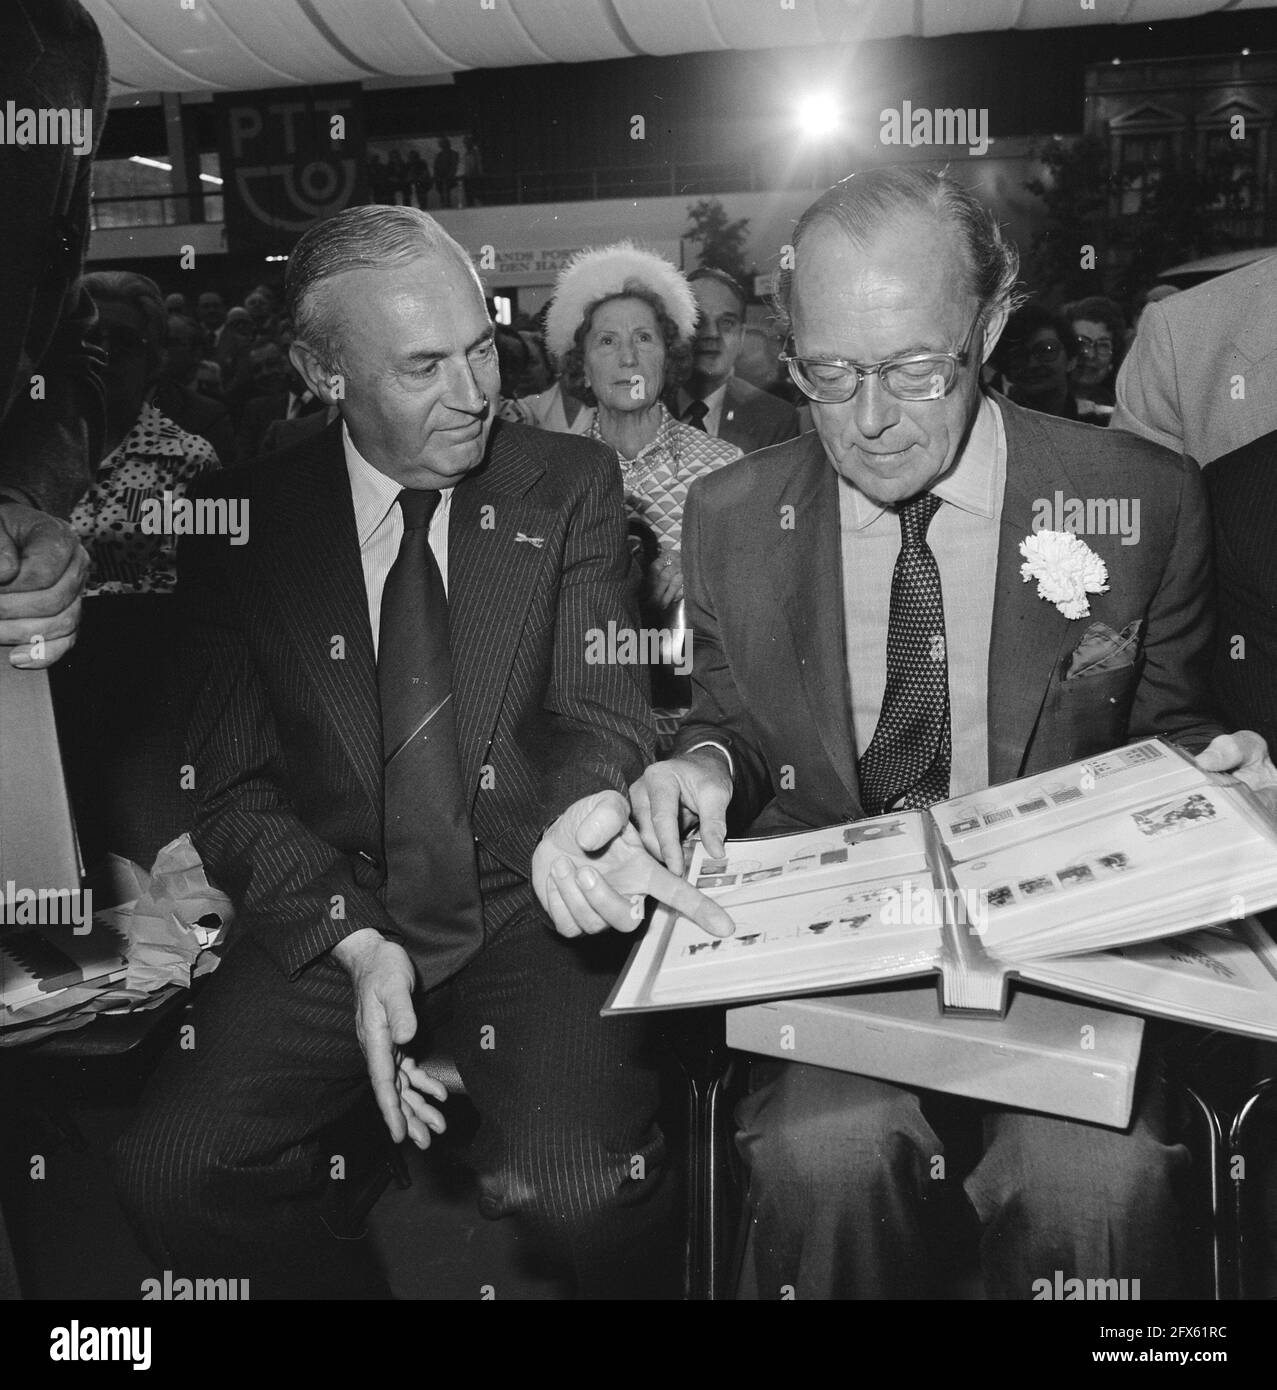 Prince Bernhard opens Amphilea 77 in RAI Amsterdam, Prince Bernhard looks at stamps with Mr. Leeman, director PTT, May 26, 1977, POSTAGE, directors, openings, princes, The Netherlands, 20th century press agency photo, news to remember, documentary, historic photography 1945-1990, visual stories, human history of the Twentieth Century, capturing moments in time Stock Photo